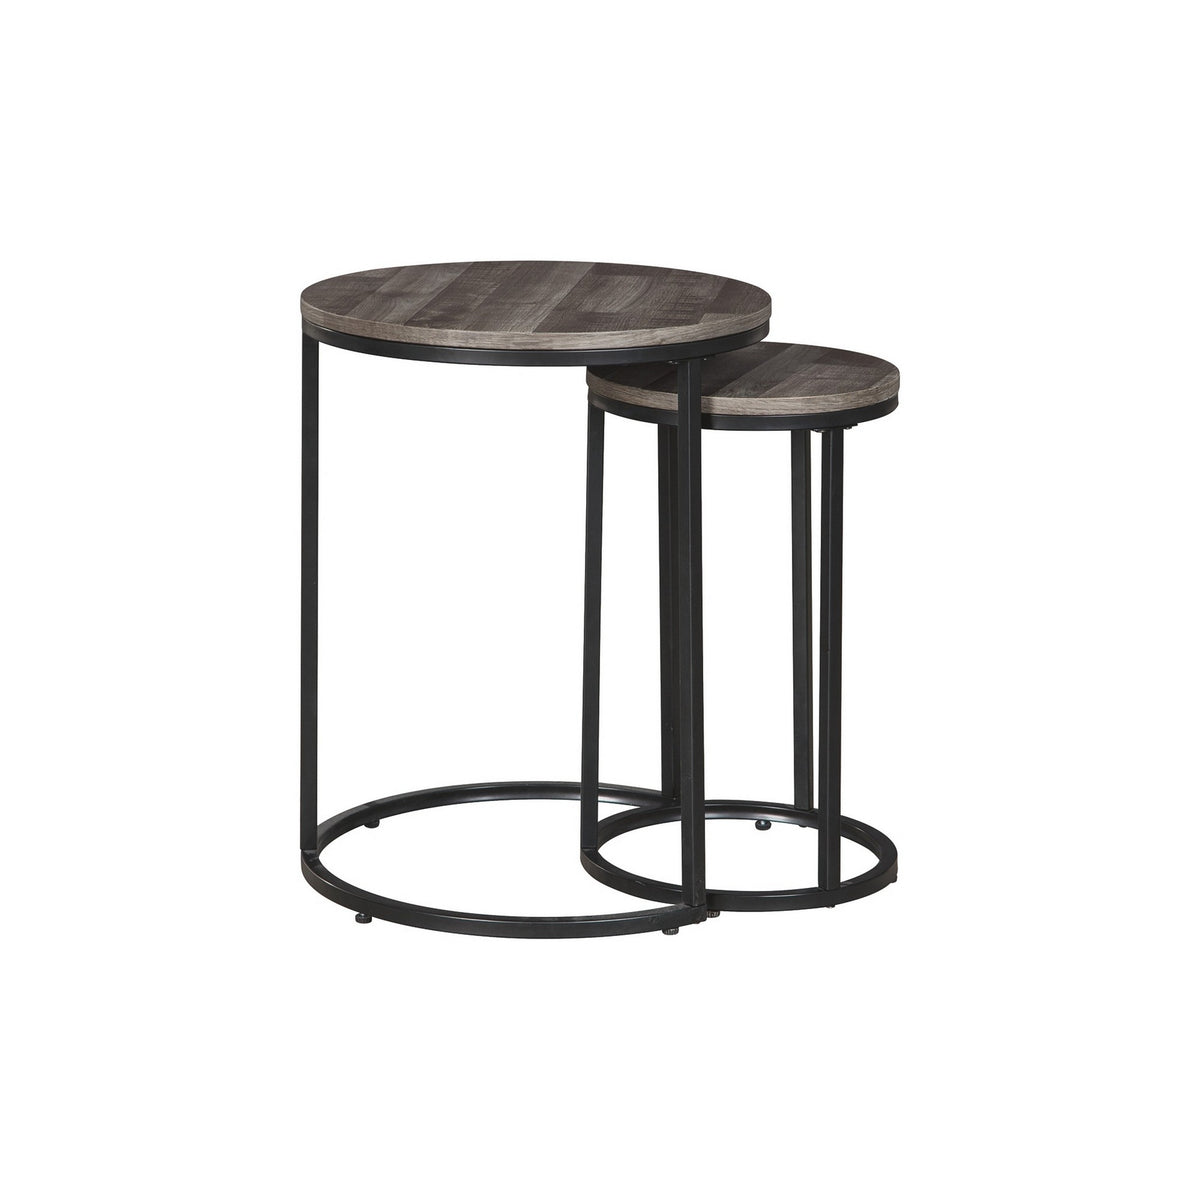 Round Wooden Top Metal Accent Table, Set of 2, Gray and Black - BM230944